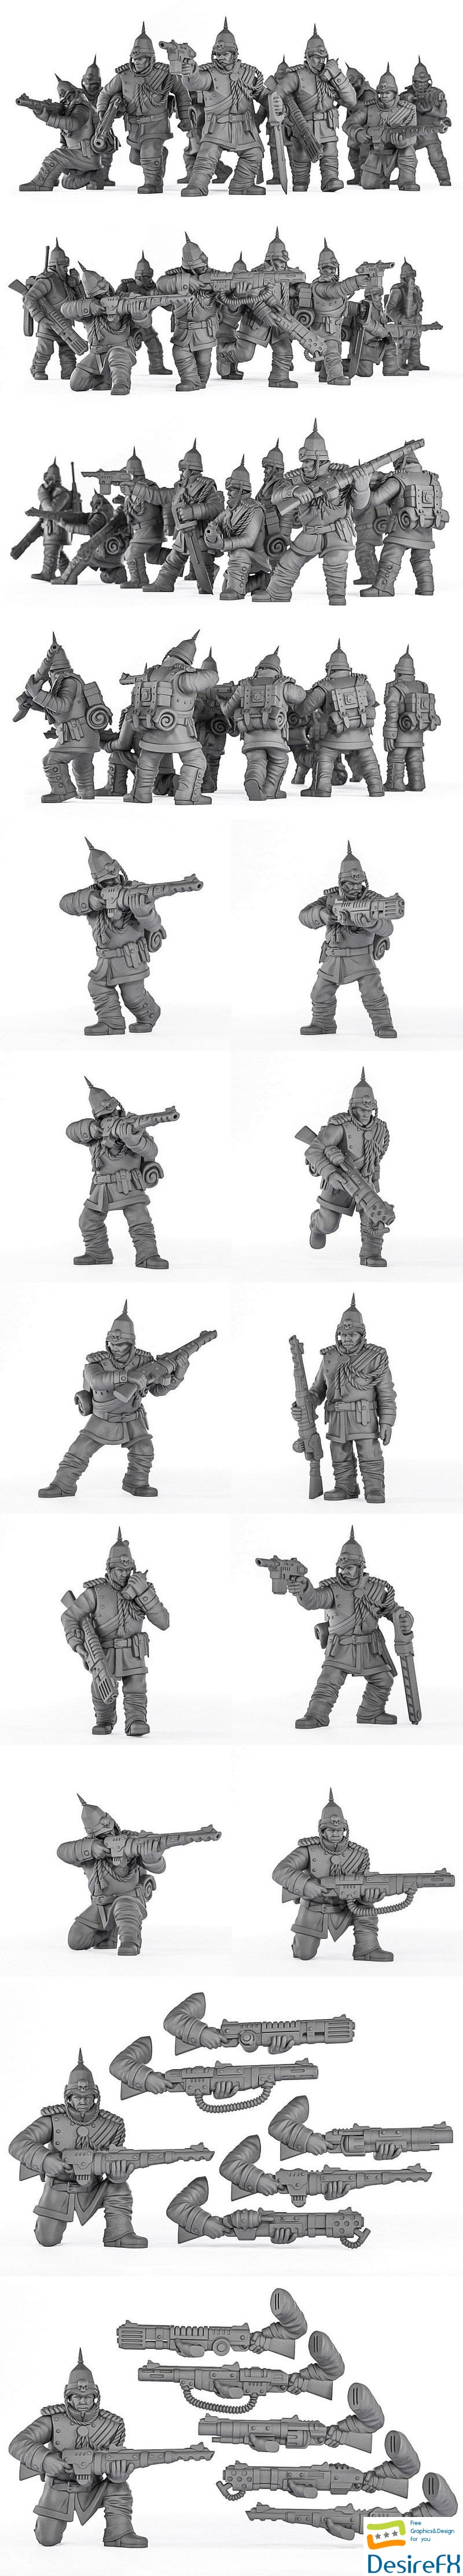 Royal Regiment - Squad of the Imperial Force - 3D Print